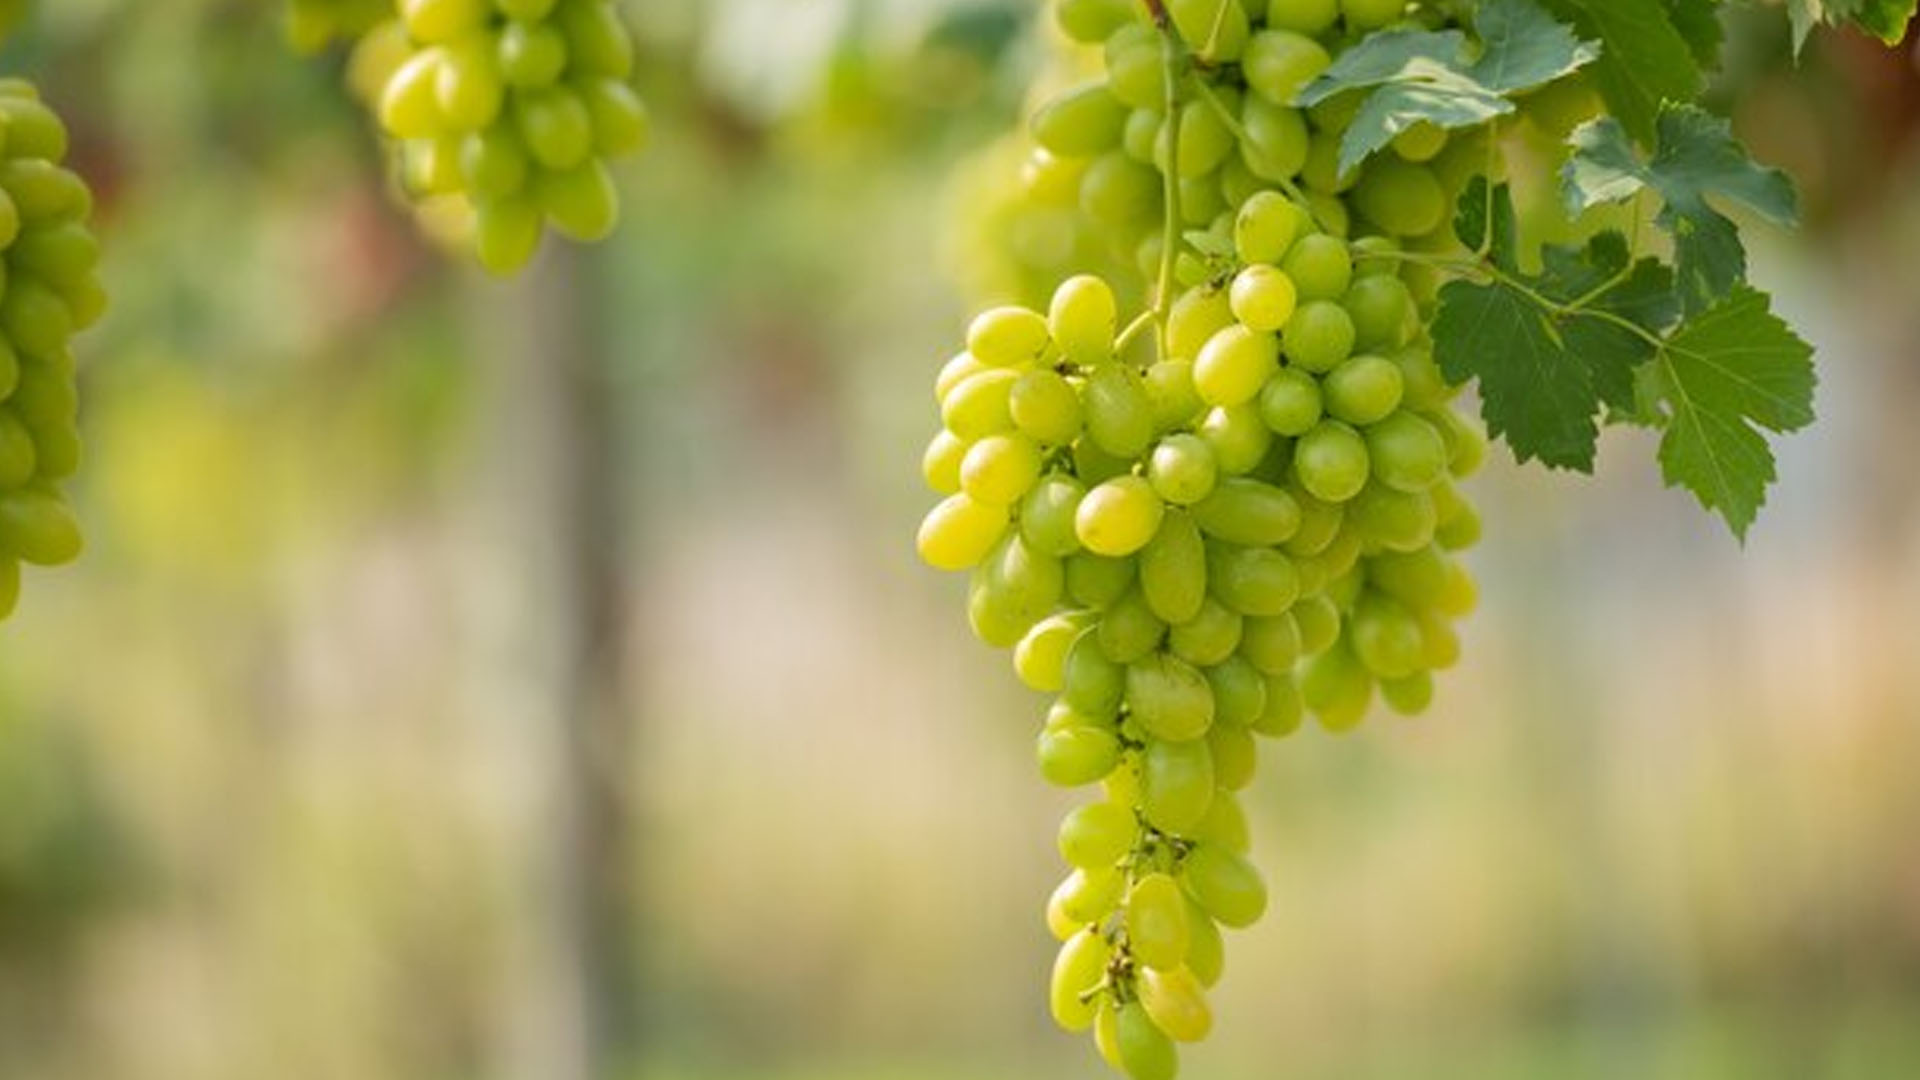 What are the Health Benefits of Grapes?